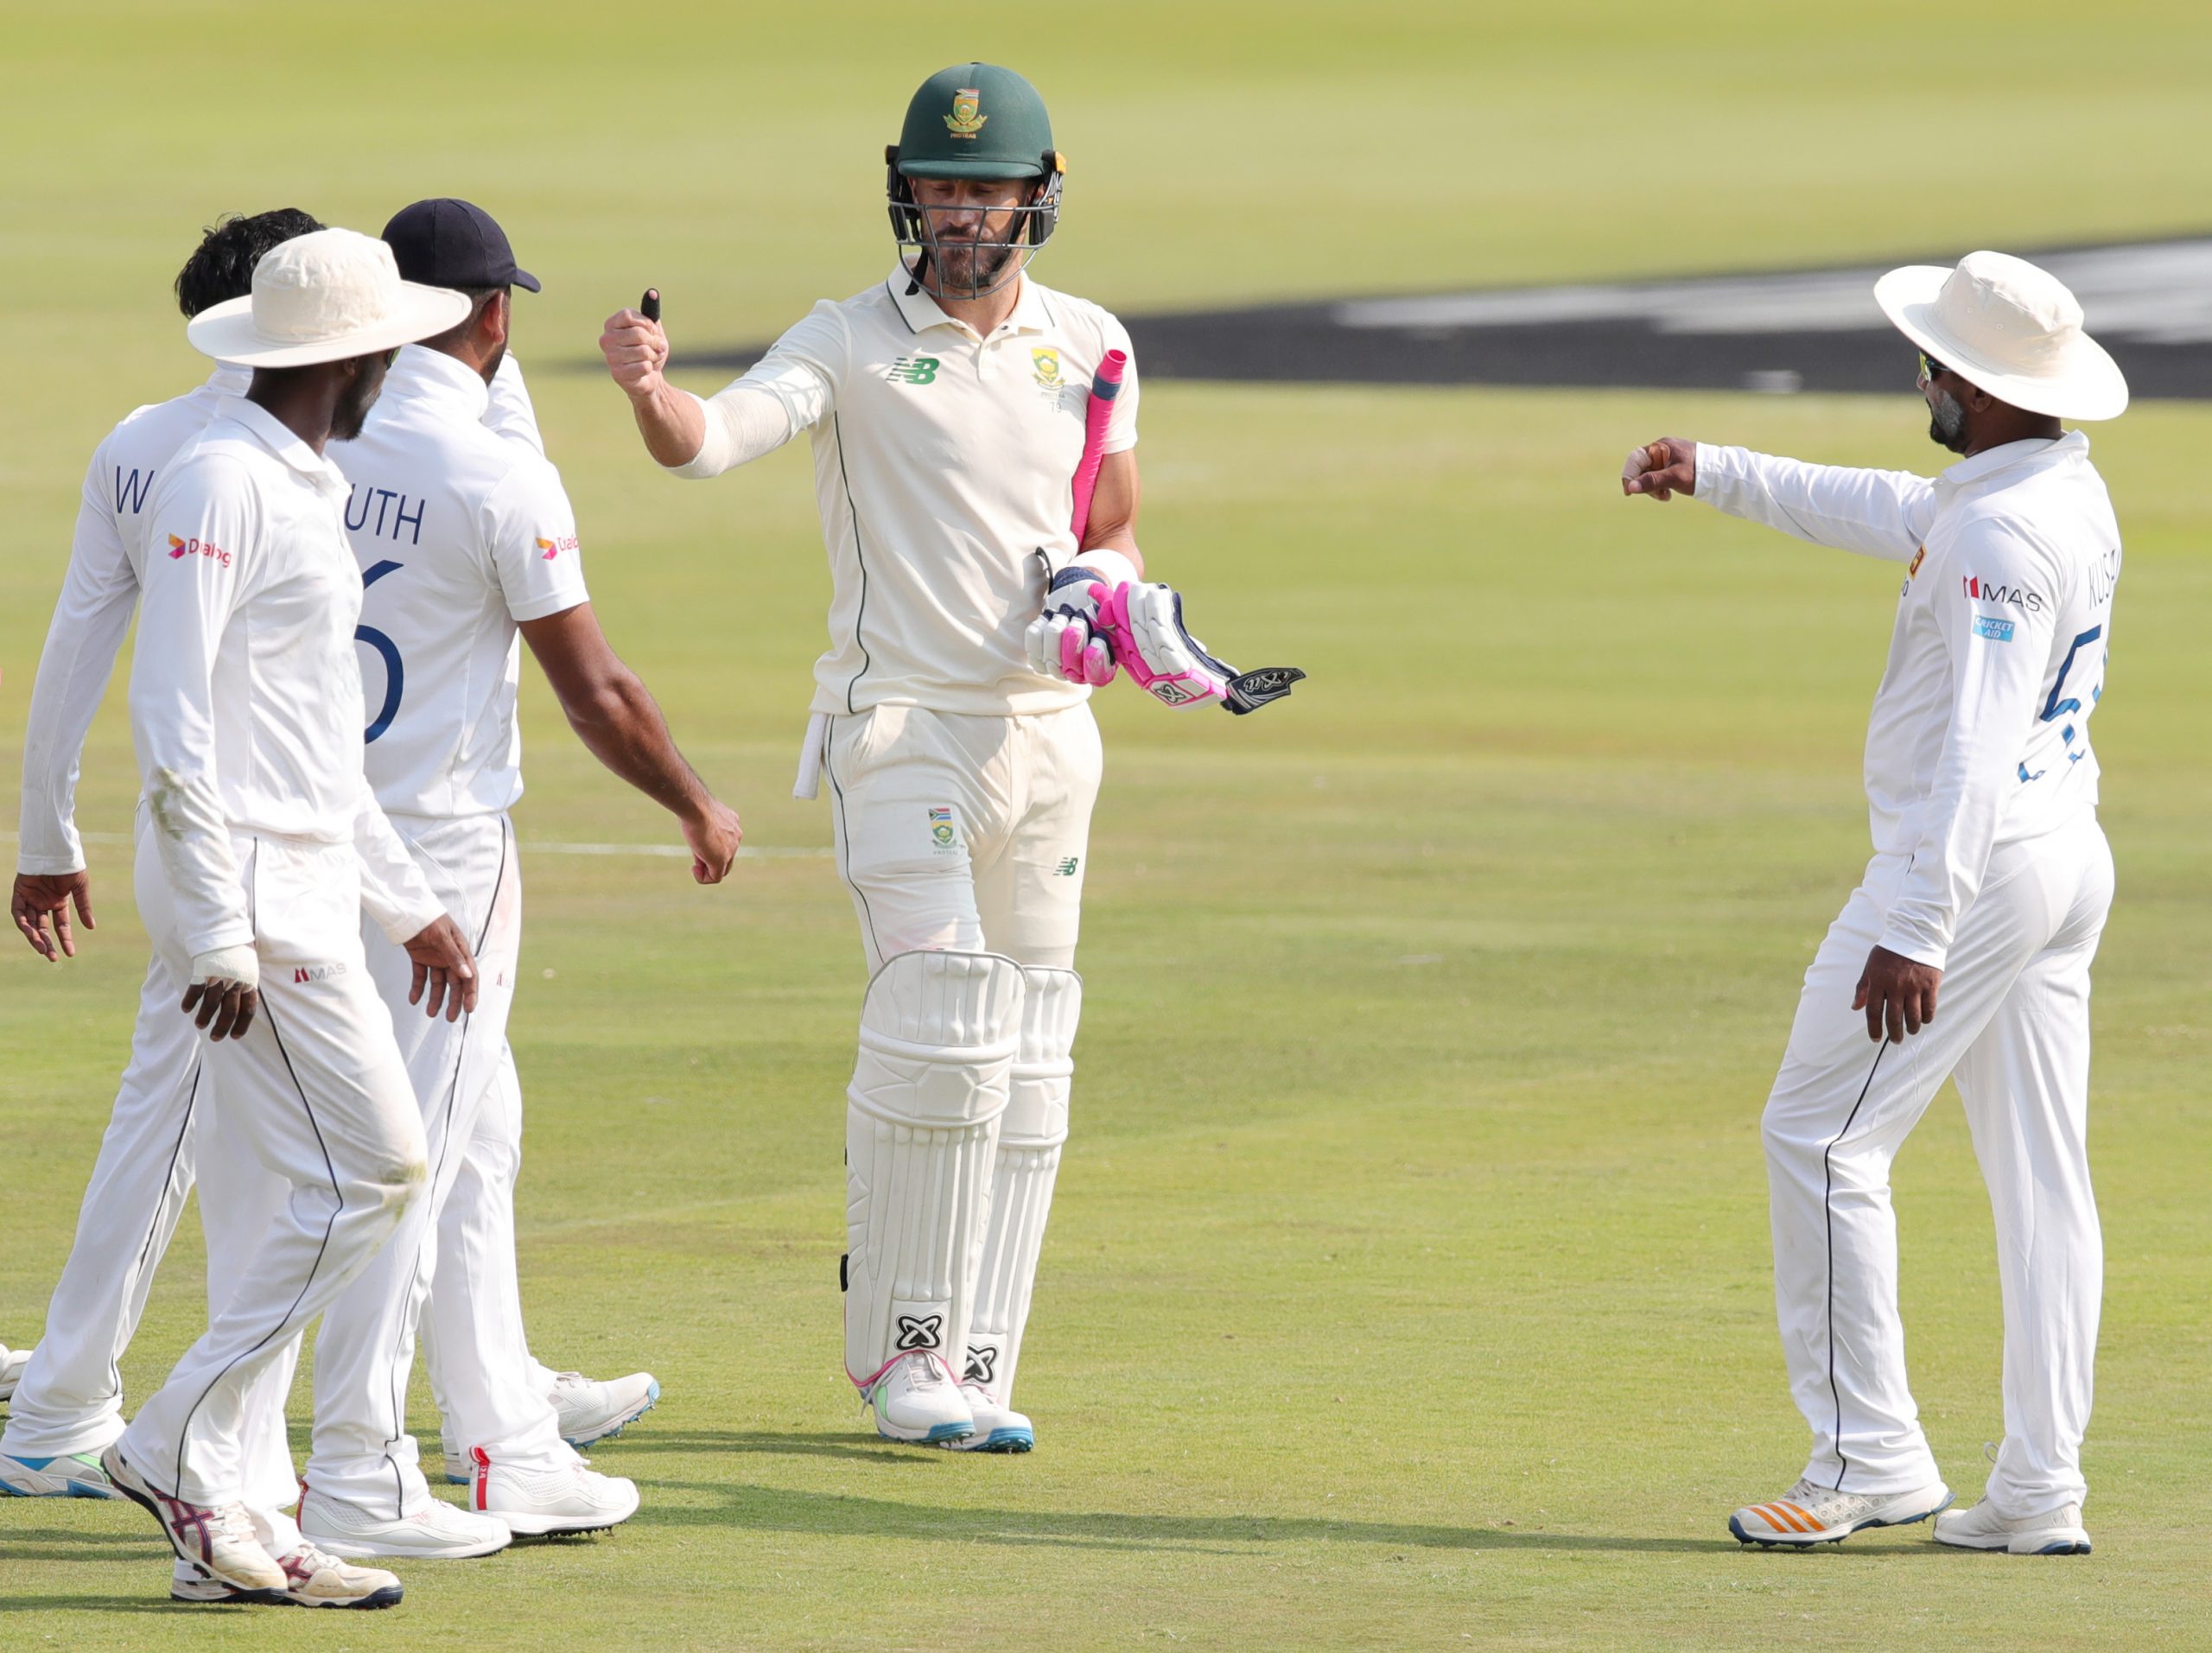 Sri Lanka 65/2, trail by 160 after South Africa amass 621 fuelled by Faf du Plessis’ 199